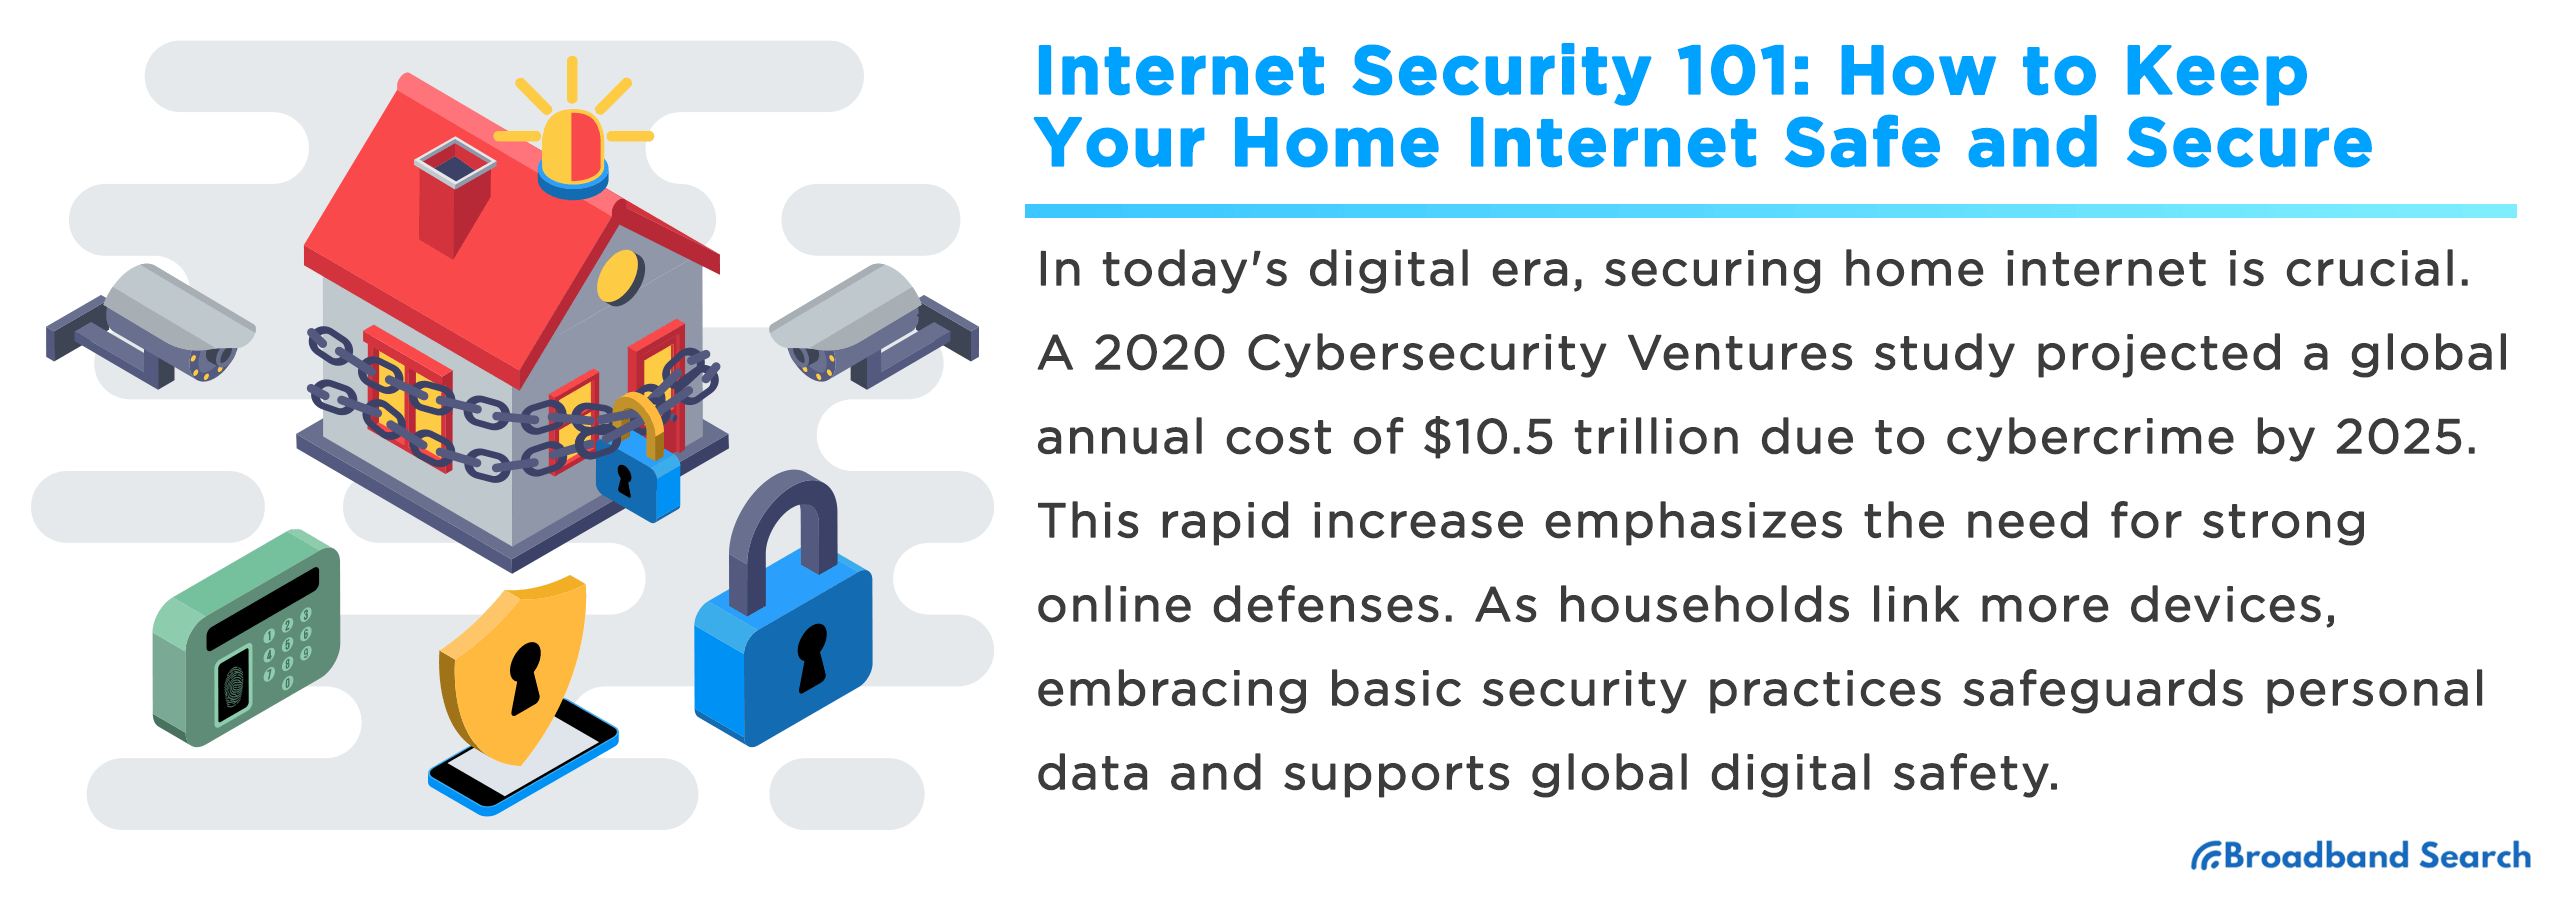 Internet Security 101: How To Keep Your Home Internet Safe And Secure